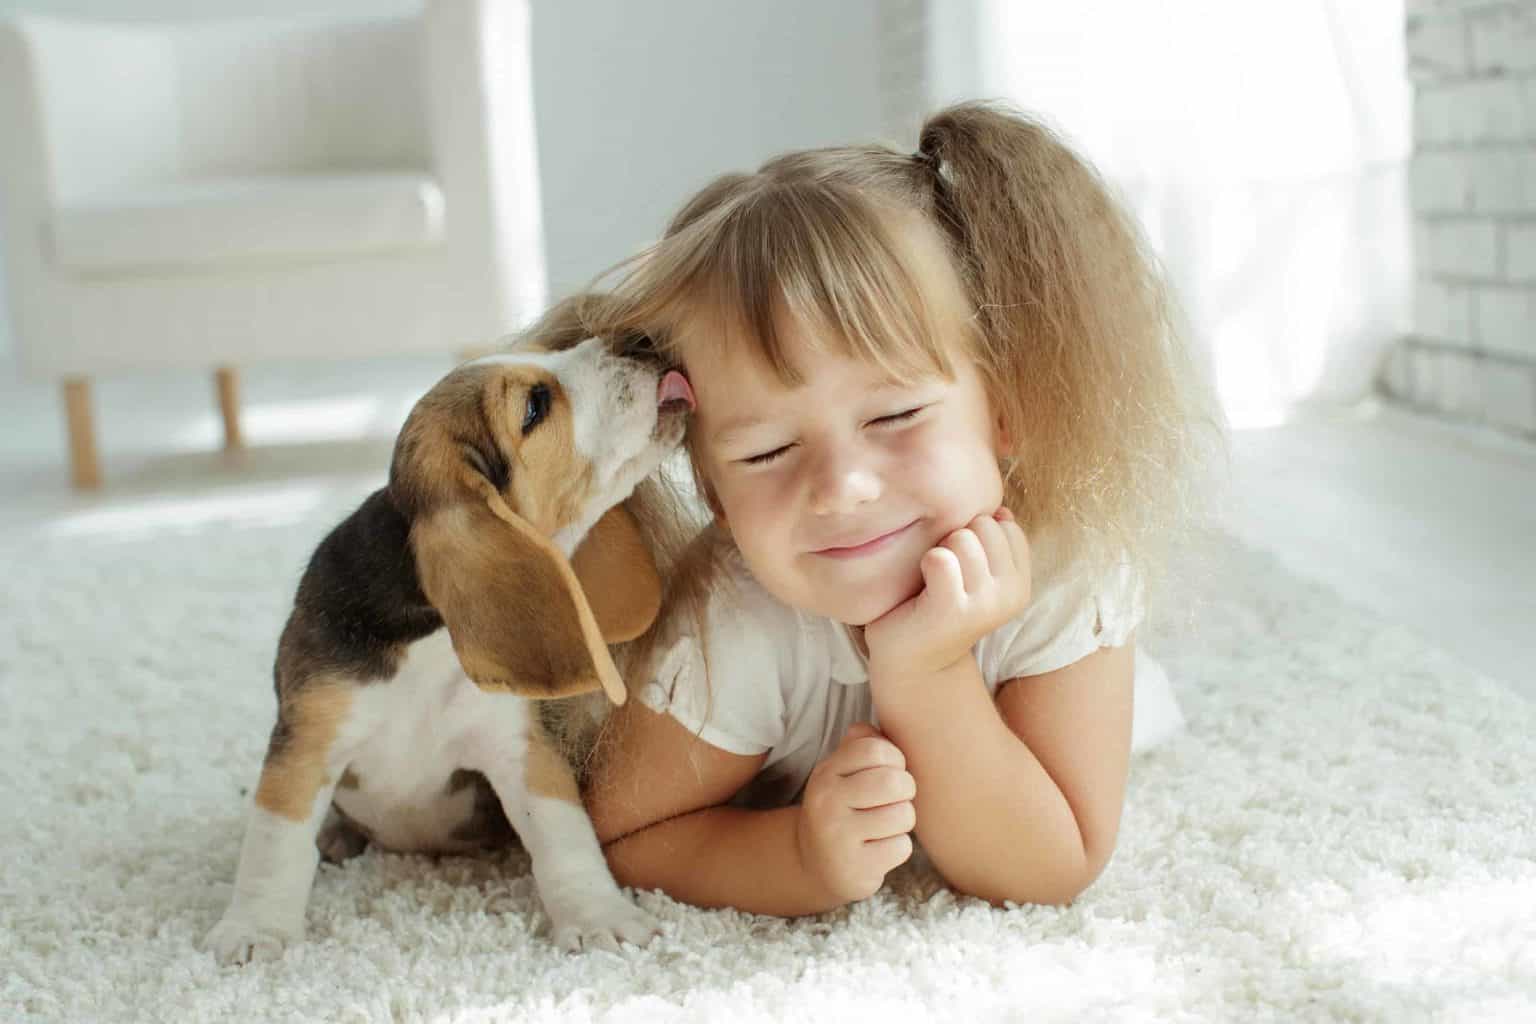 Beagle puppy gives little girl a kiss. When petting a dog, the child's blood pressure decreases. Dopamine floods his brain as he strokes the dog. Dopamine is associated with feelings of love, bonding, and pleasure.